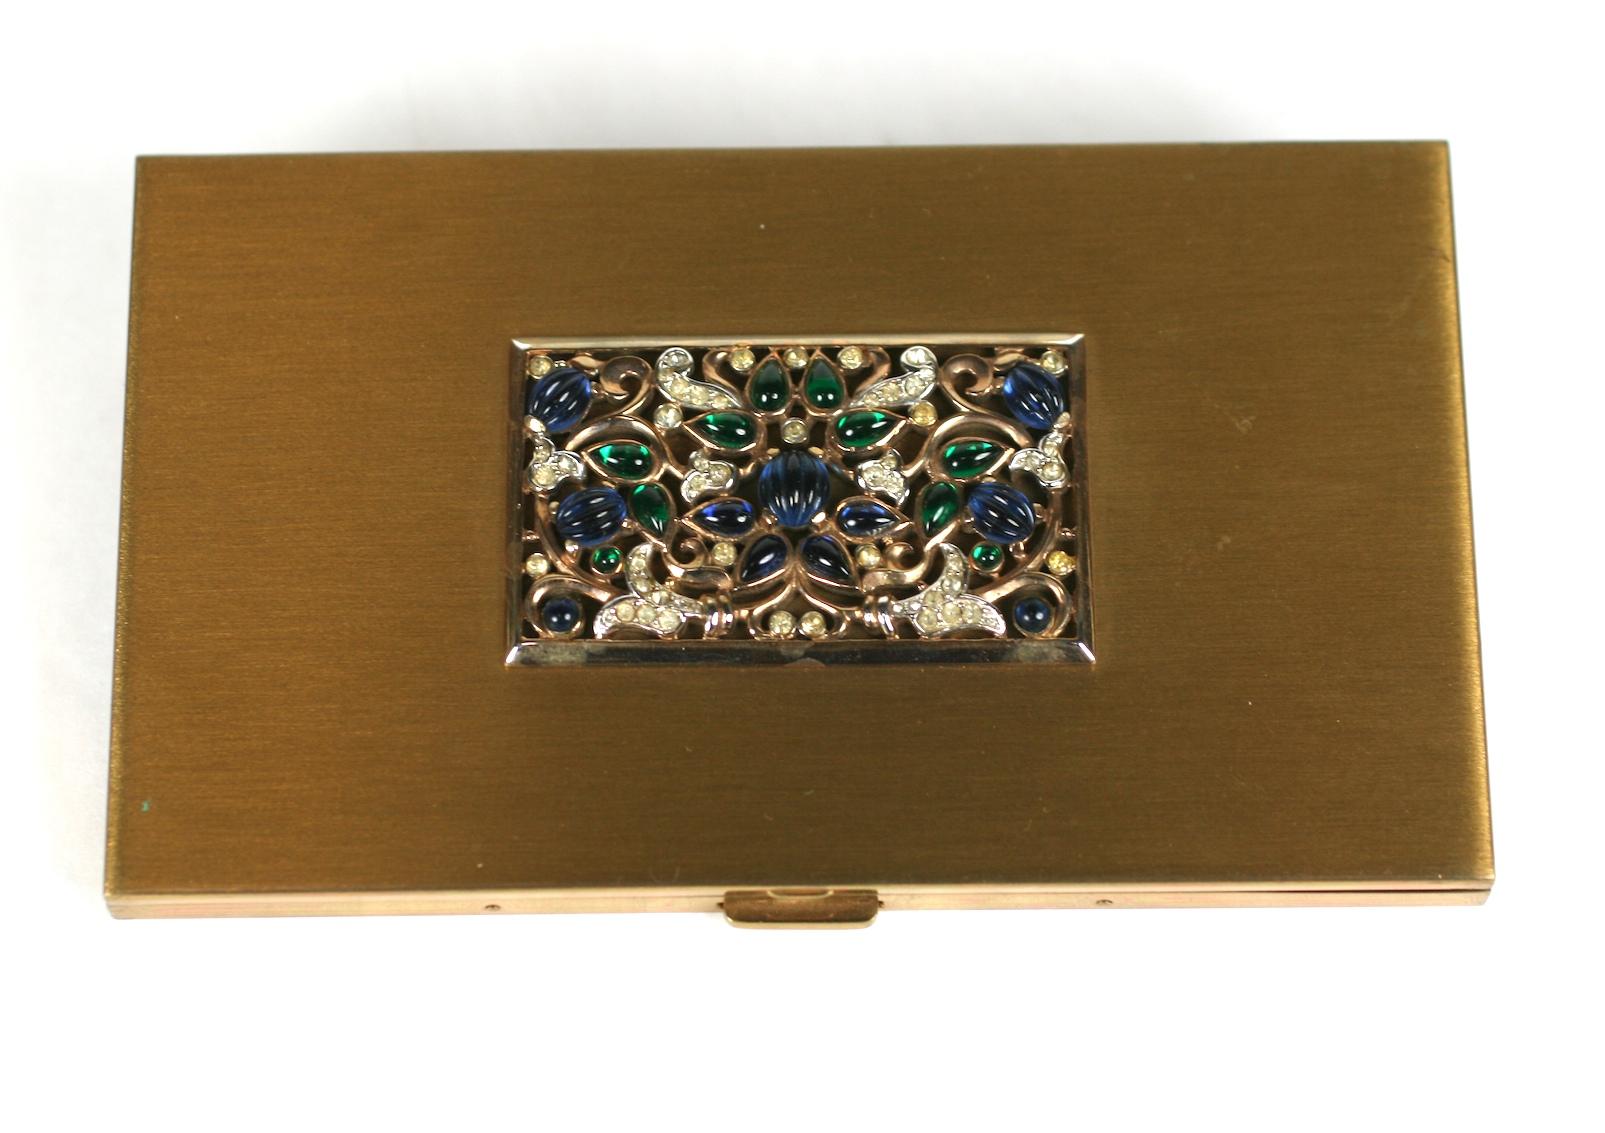 Rare Trifari Jewels of India Cigarette Case from the 1940's by Alfred Phillipe. A motif of faux sapphire and emerald Indian Moghul carved jewels are applied to a brass toned case which can used for cigarettes, cards or small flat items (not phones).